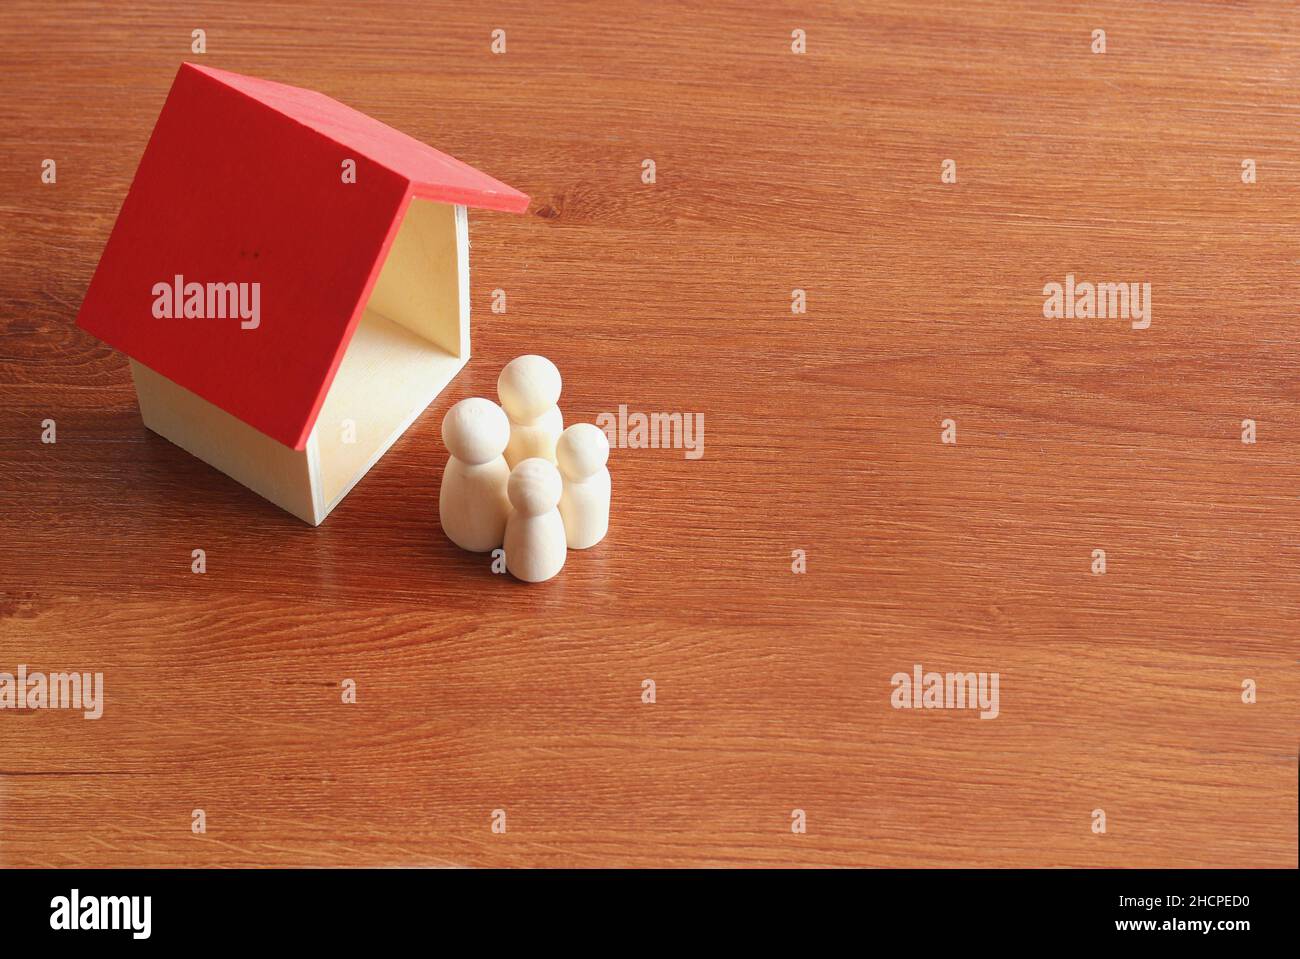 Family planning and property concept. Close up image of wooden toy house and dolls. Stock Photo